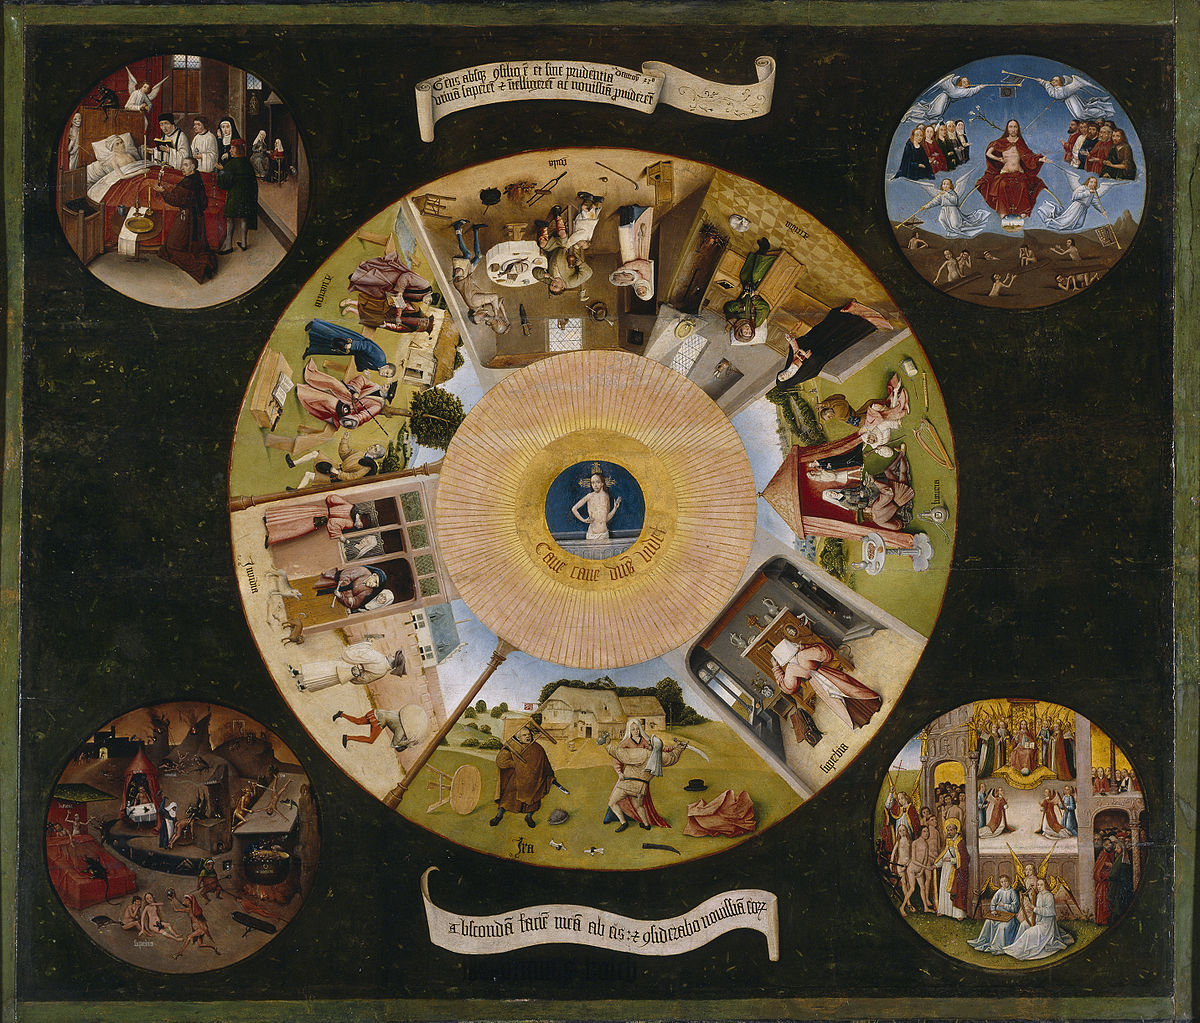 hieronymus_bosch-_the_seven_deadly_sins_and_the_four_last_things.JPG